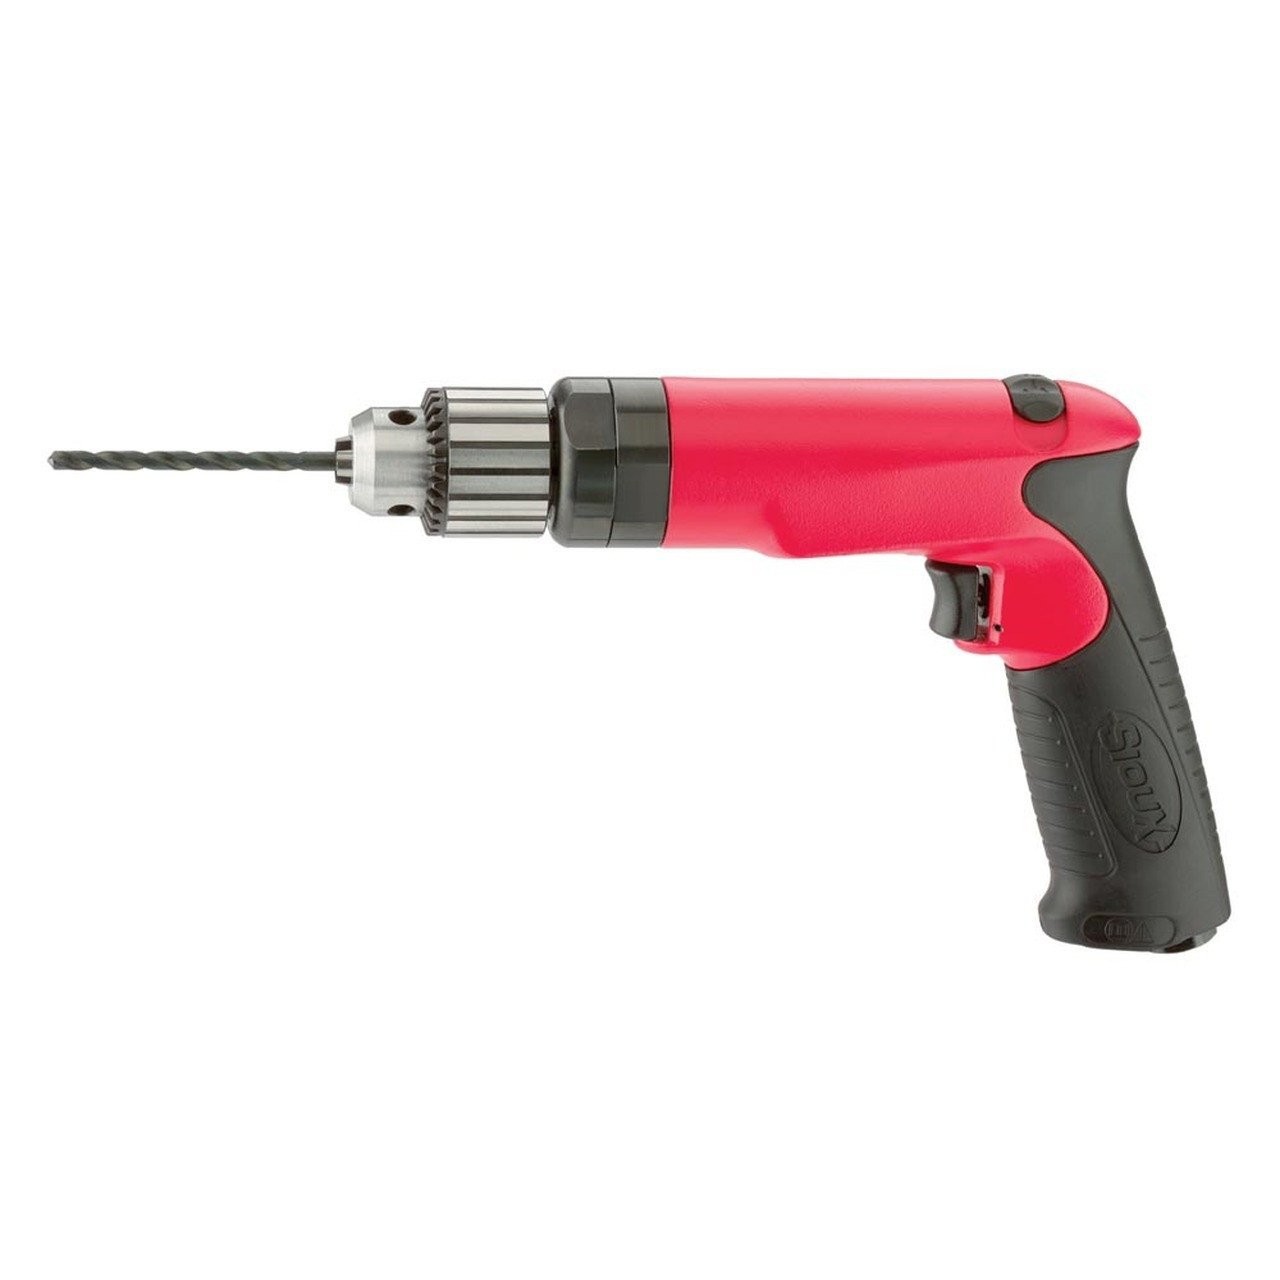 Sioux Tools SDR10P40R2 Reversible Pistol Grip Drill | 1 HP | 4000 RPM | 1/4" Keyed Chuck